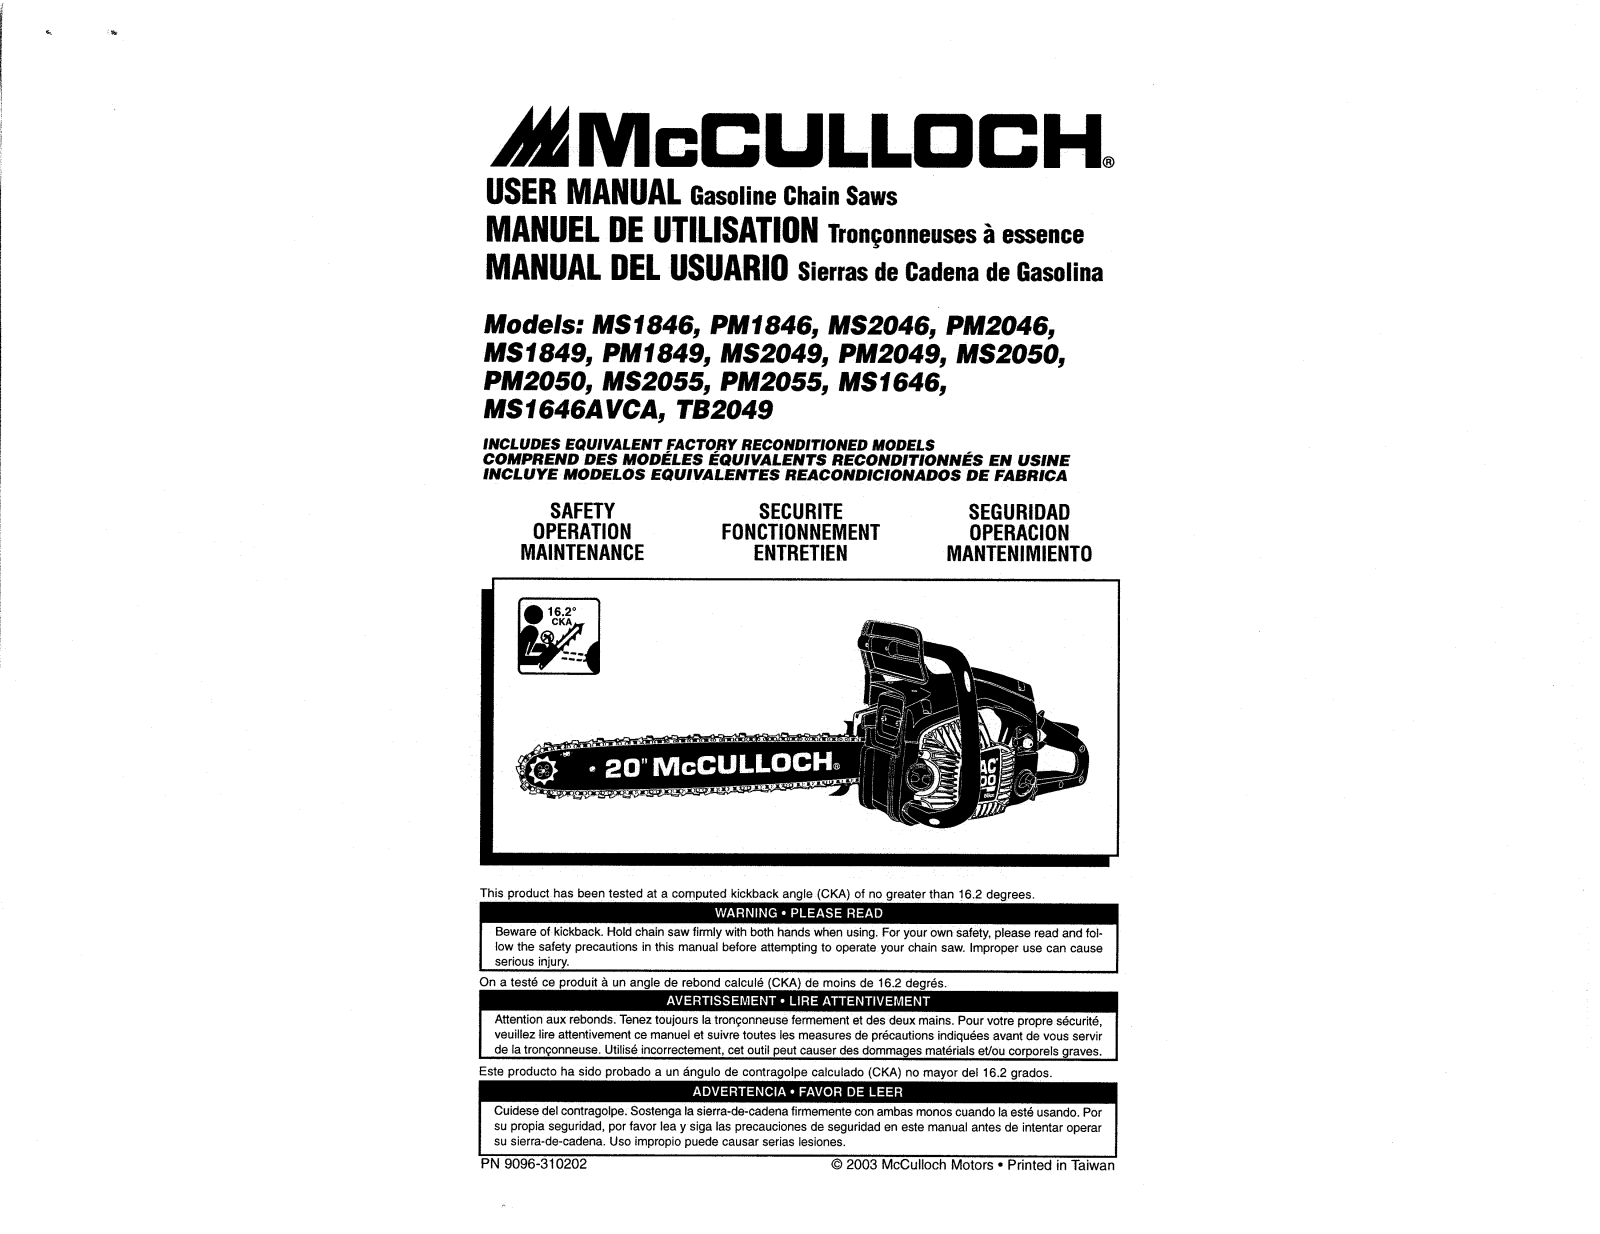 mcculloch ms1846, pm1846, ms2046, pm2046, ms1849 user Manual